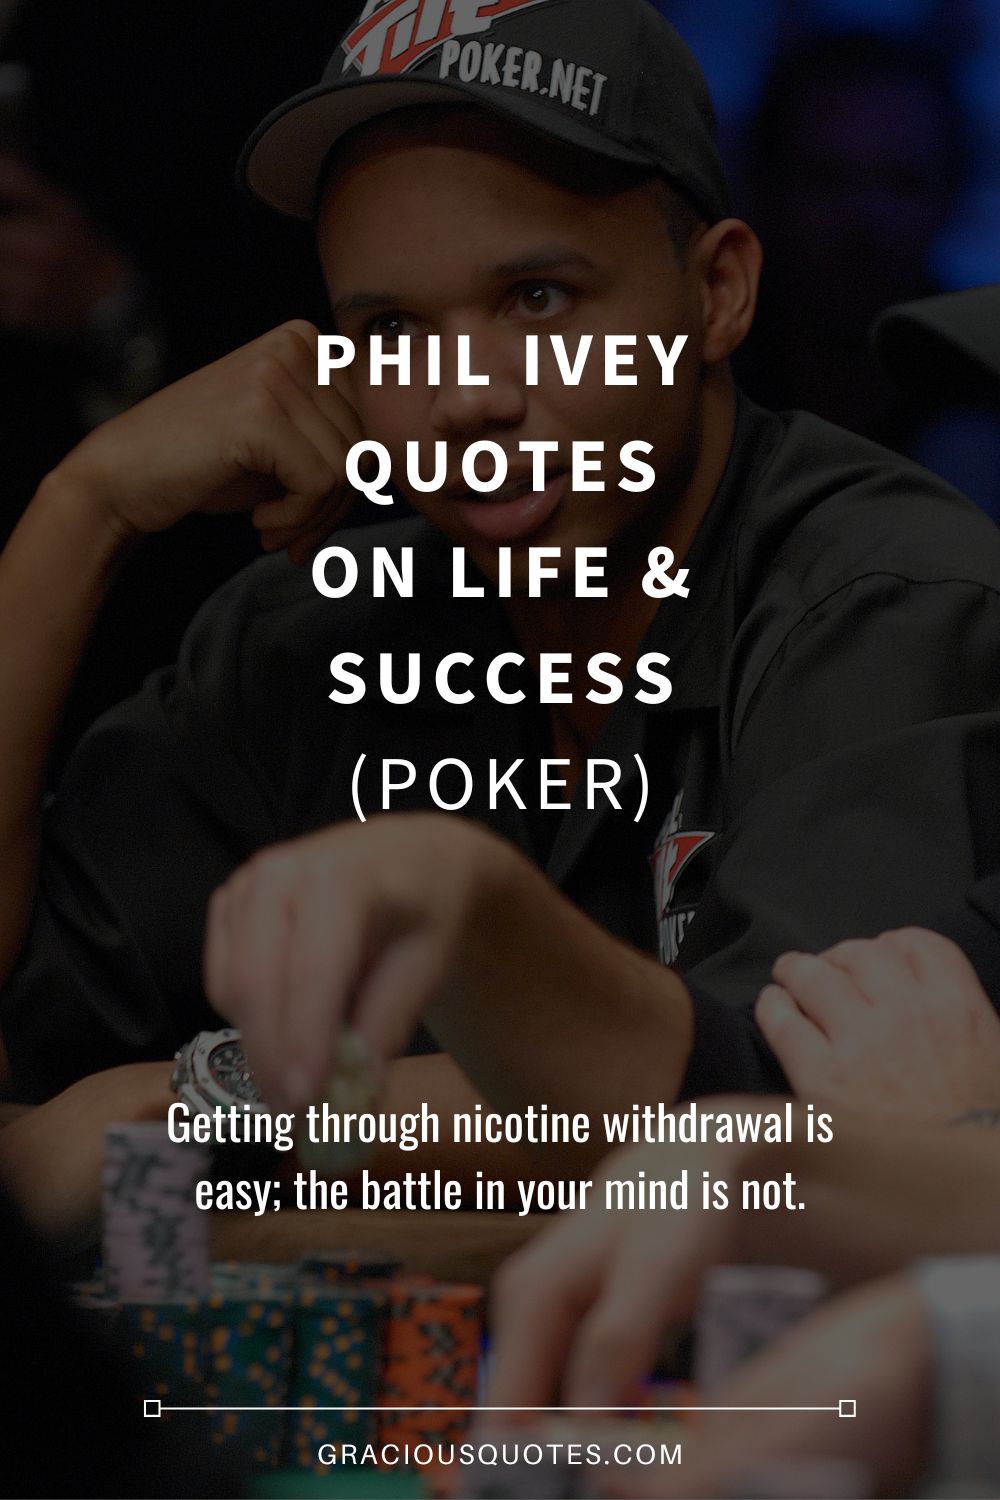 Phil Ivey Quotes on Life & Success (POKER) - Gracious Quotes